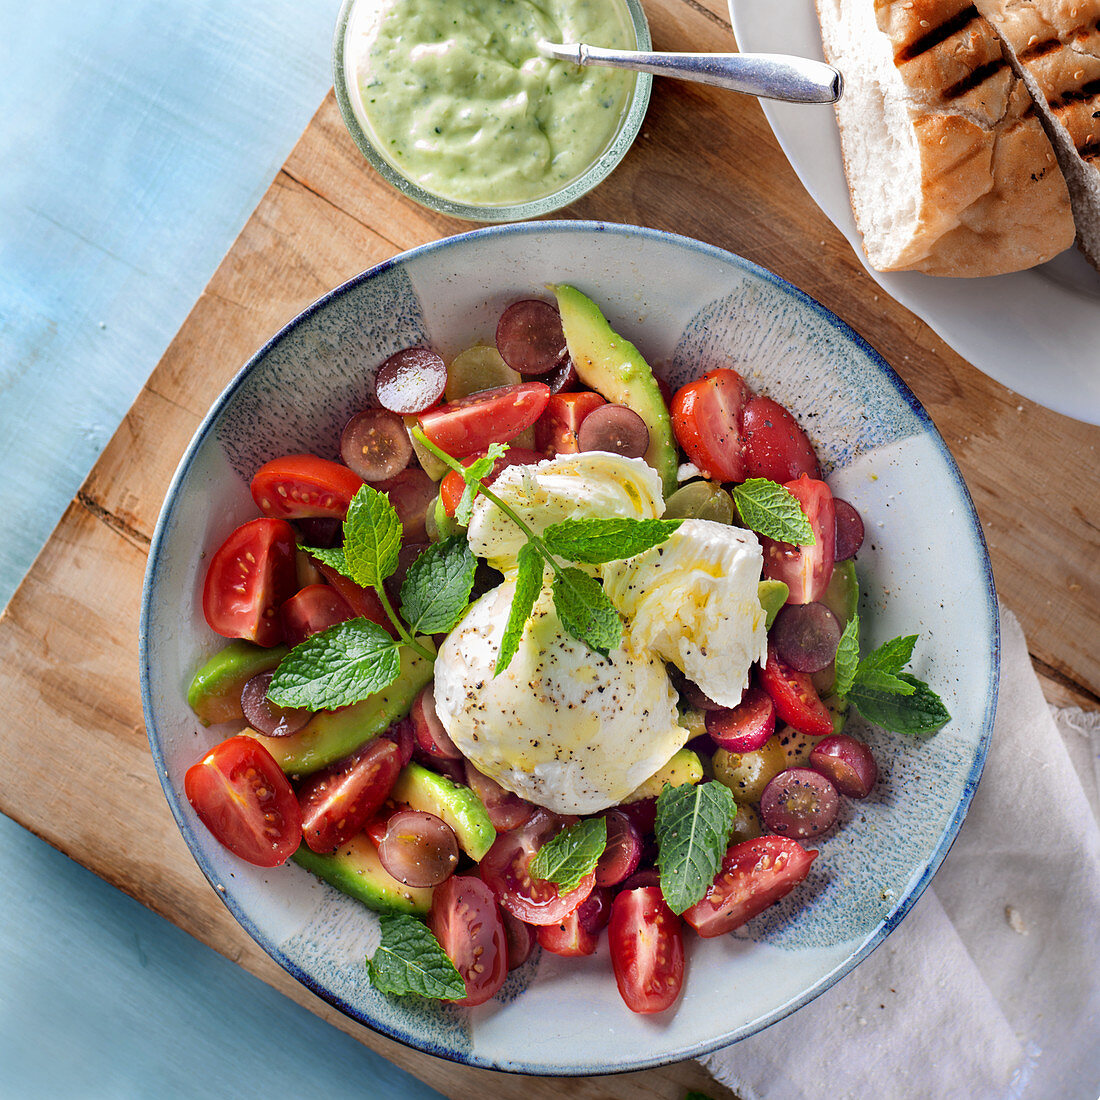 Avocado and tomato salad with grapes, mozzarella, mint and mint yoghurt dressing